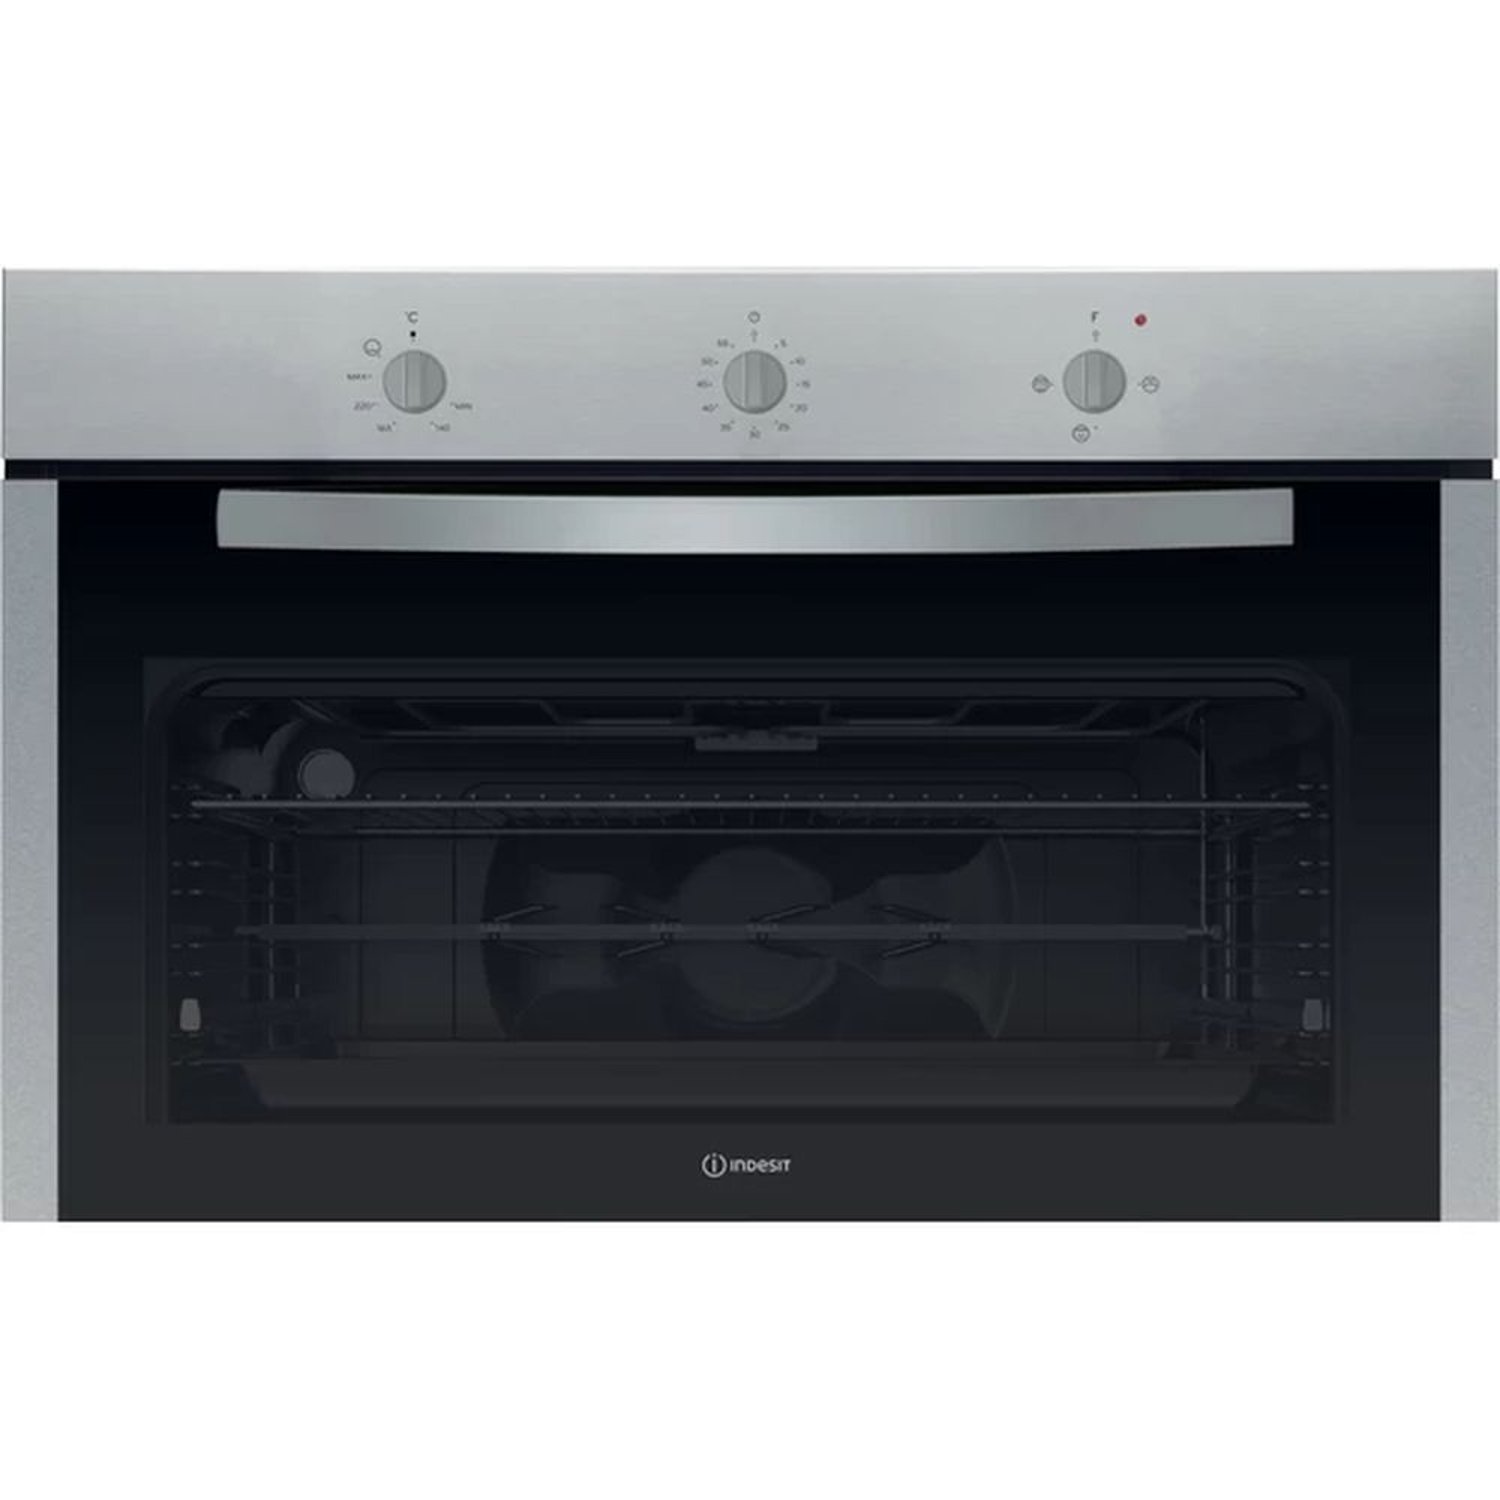 Indesit 90cm Gas/Electric Oven IGESM-53G3 